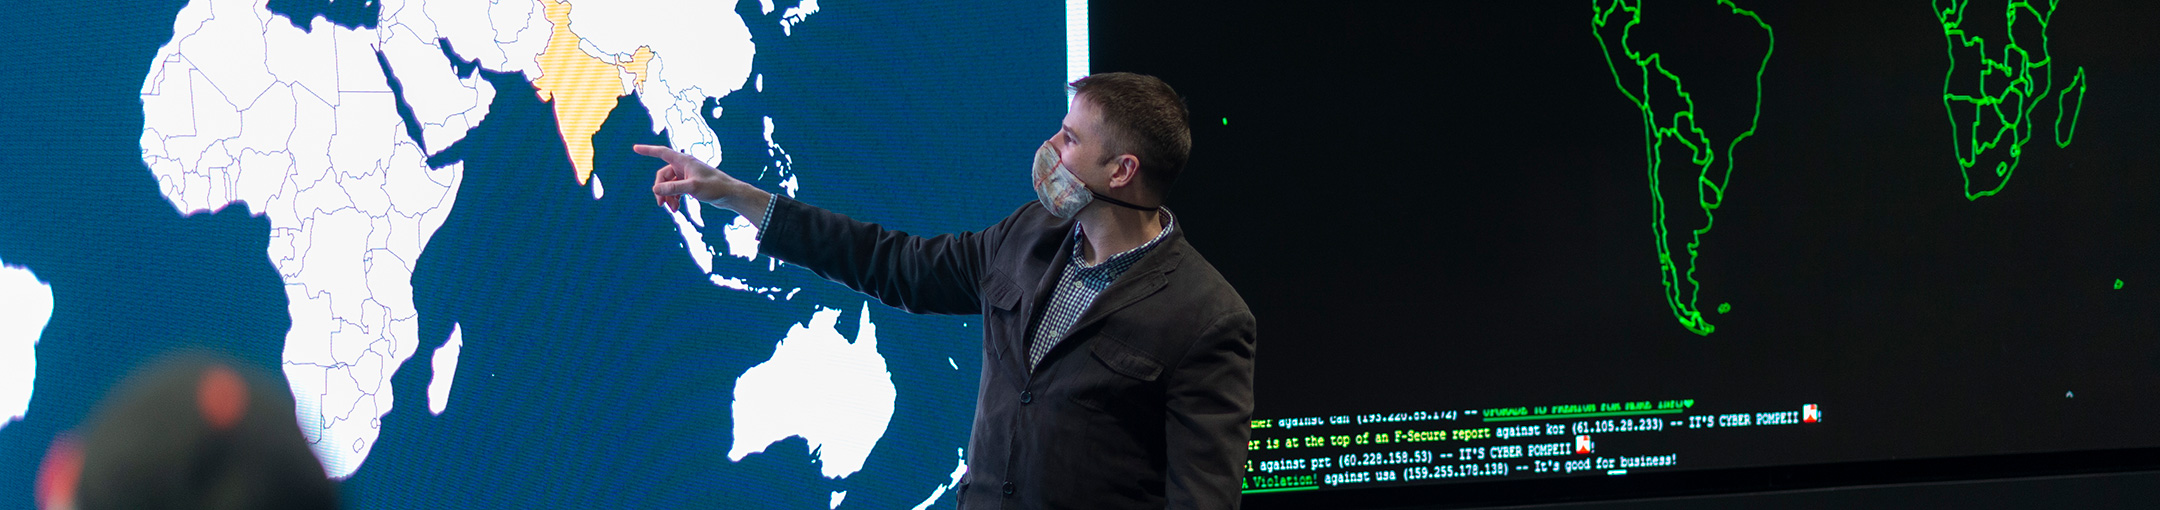 Professor pointing at a large screen displaying the globe.